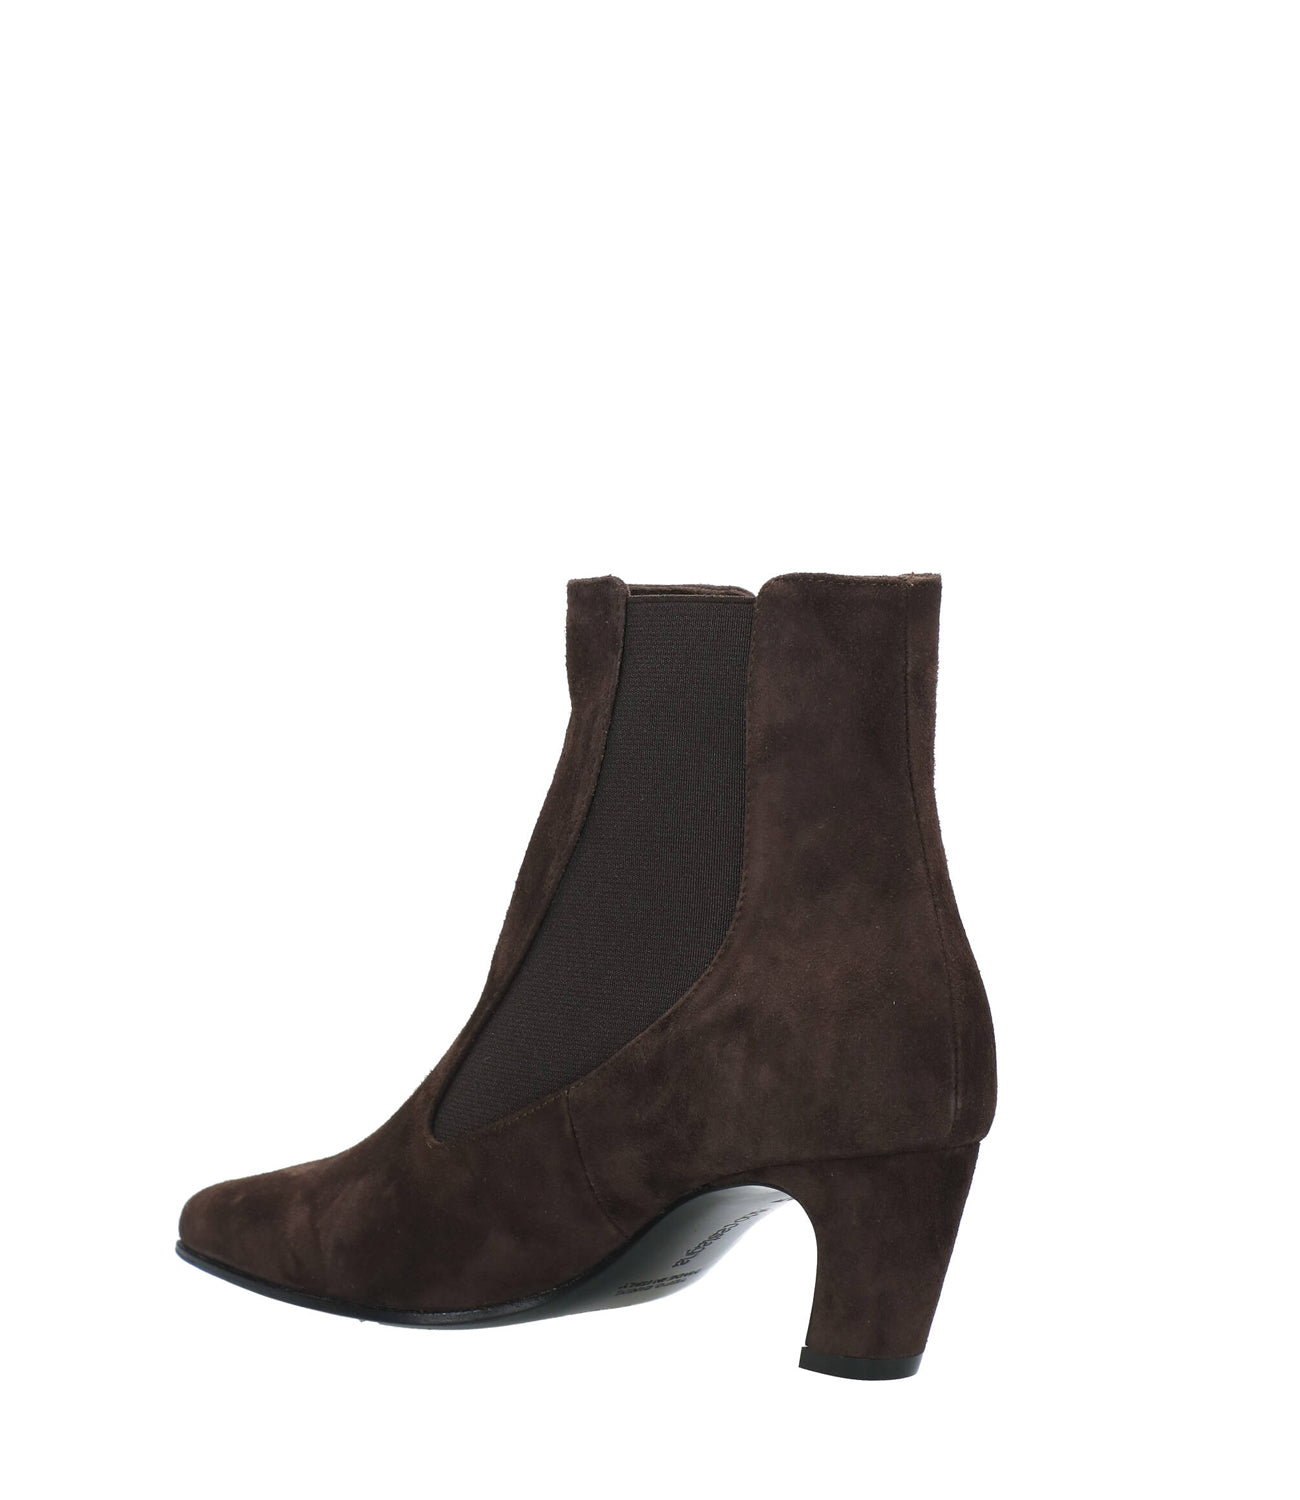 Dark Brown ankle boot